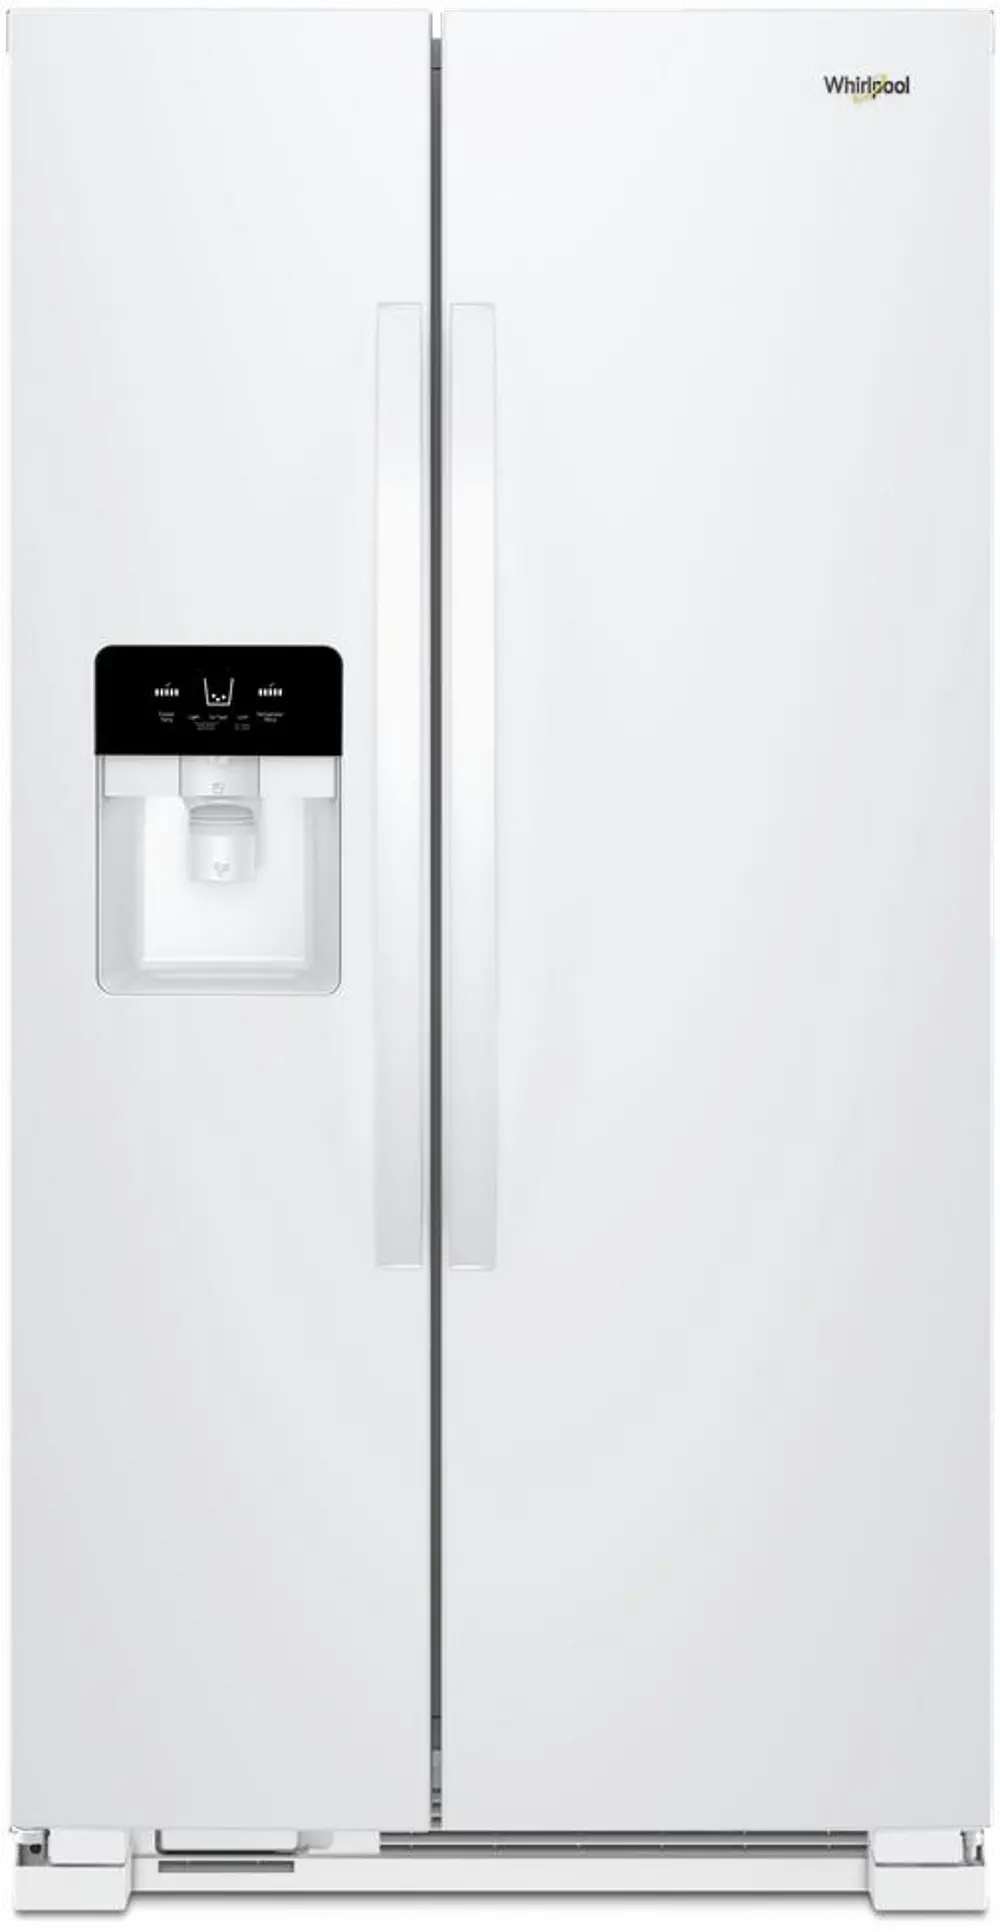 WRS325SDHW Whirlpool 24.55 cu ft Side by Side Refrigerator - White-1